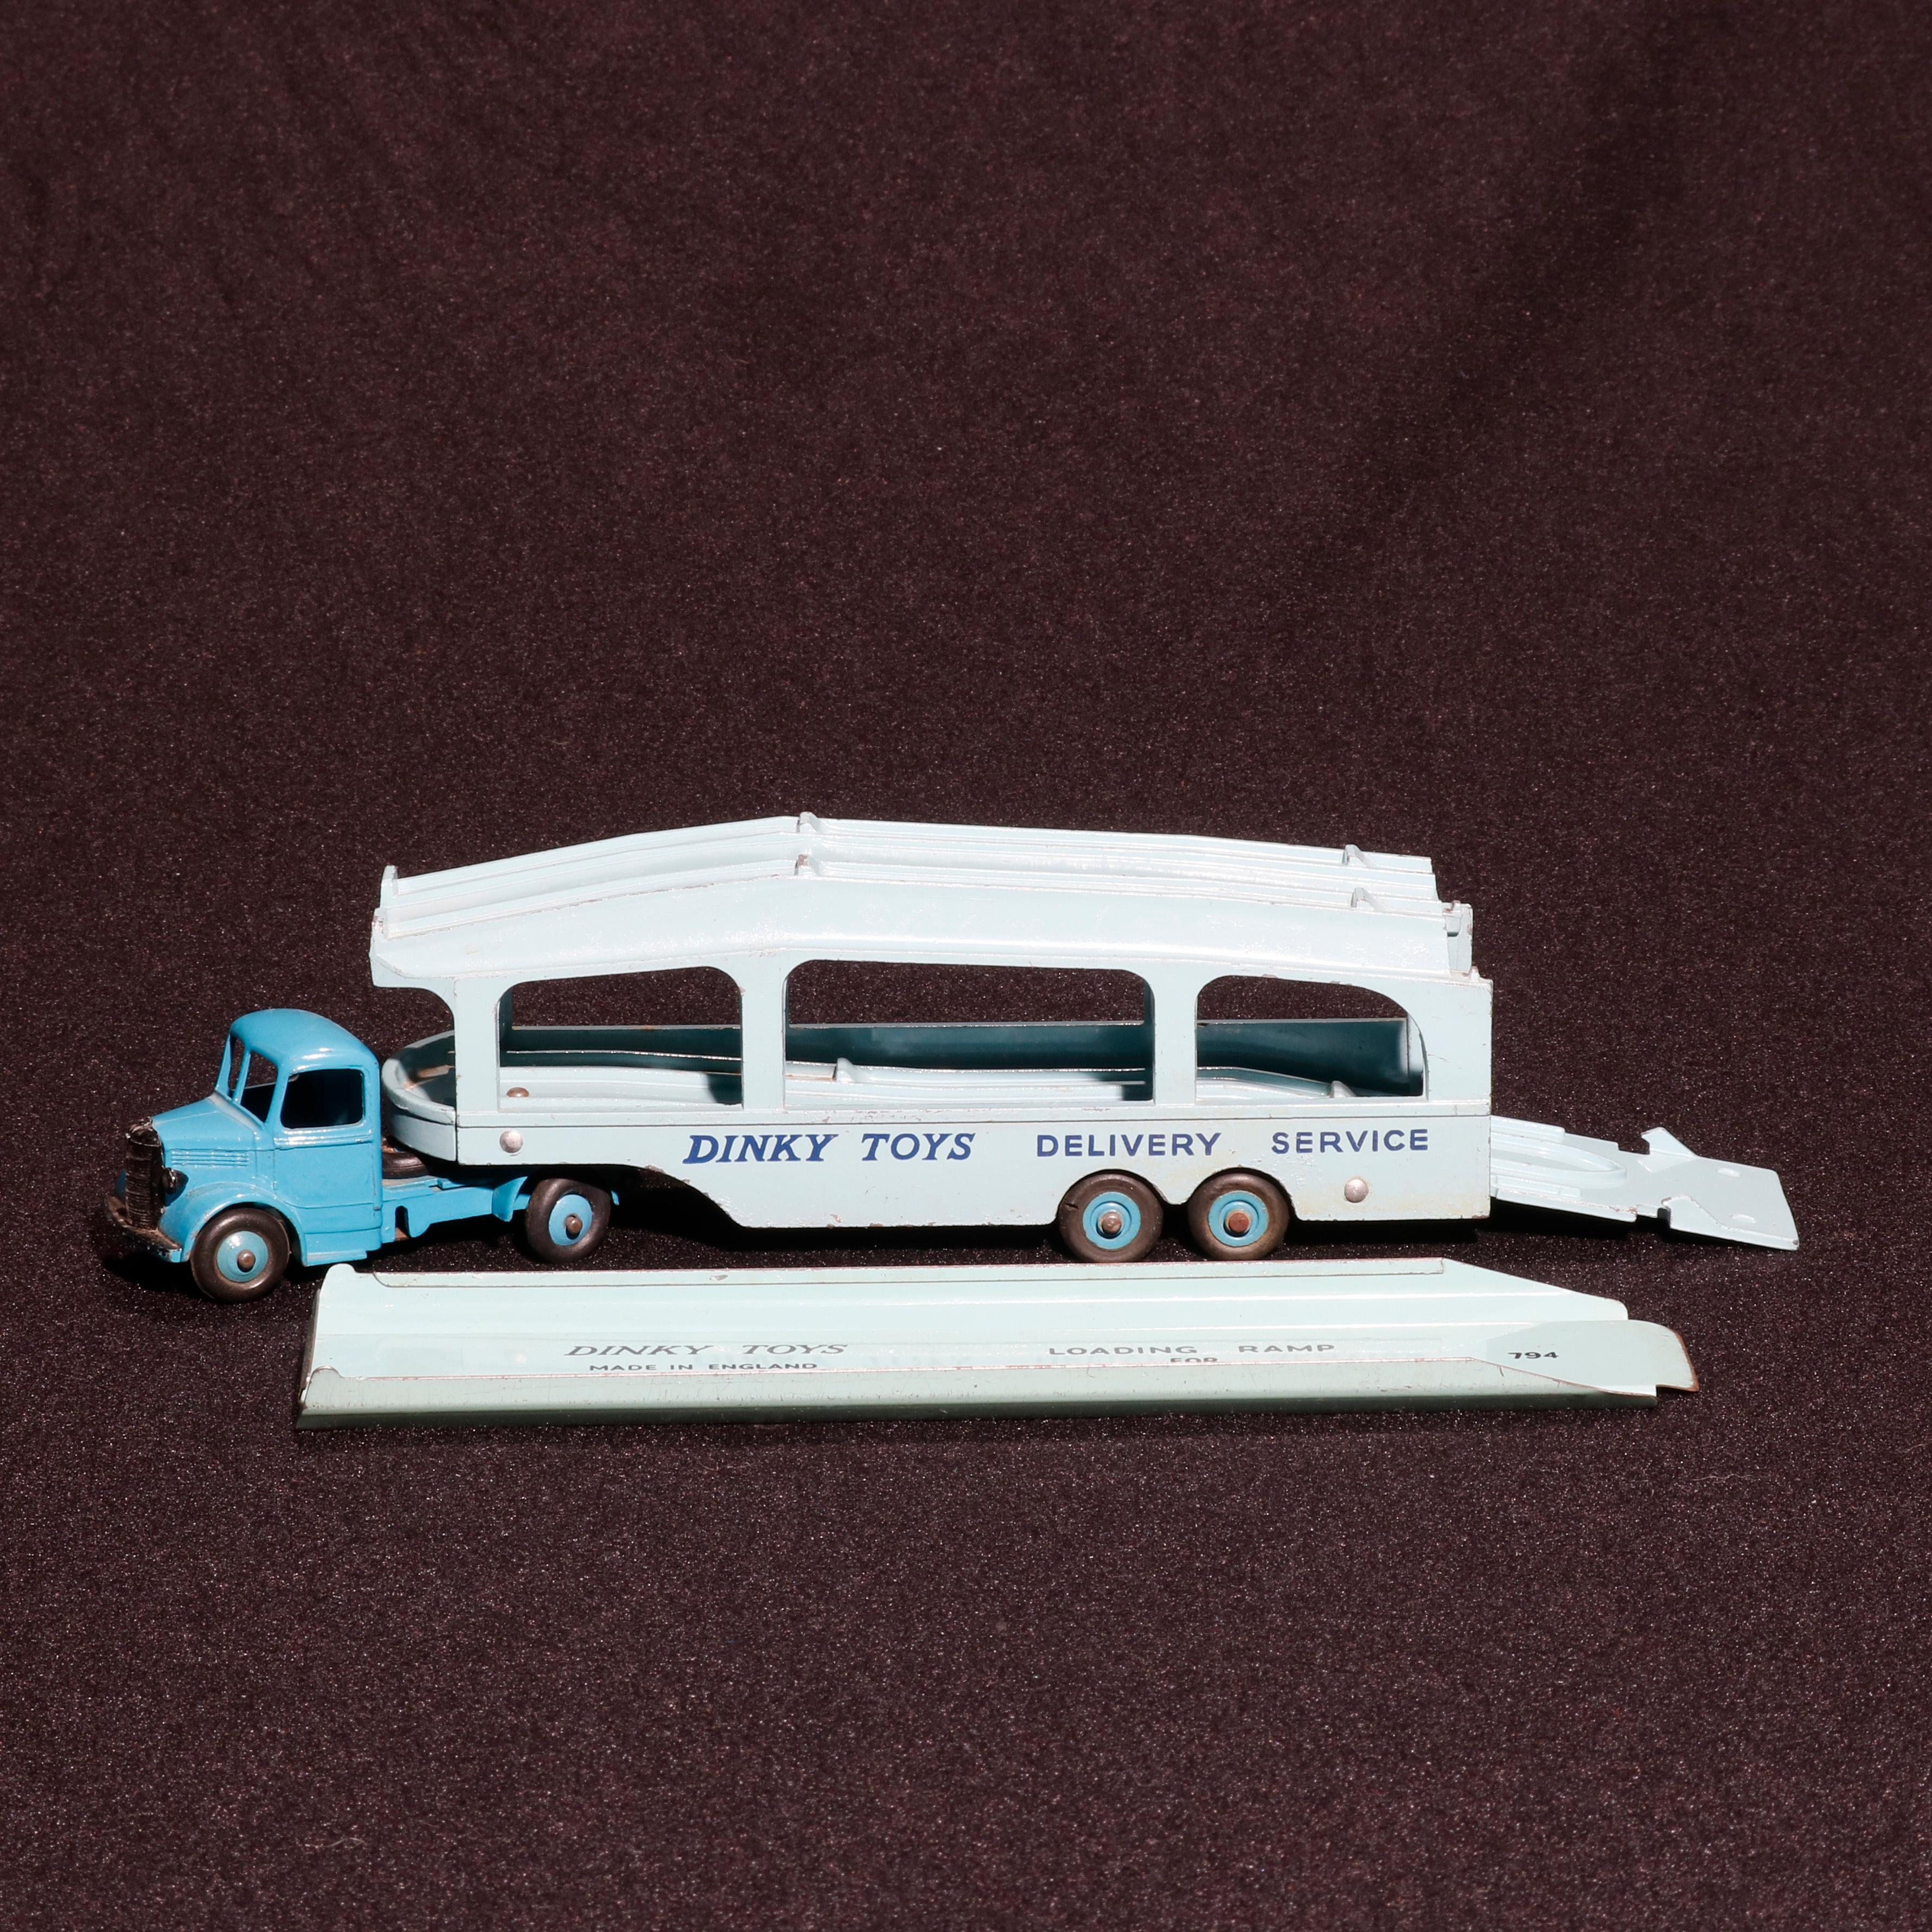 Antique Die Cast Dinky Toy delivery truck with blue cab, auto carrier trailer (hauler) and loading ramp, labeled as photographed, circa 1930

Measures- 2.88